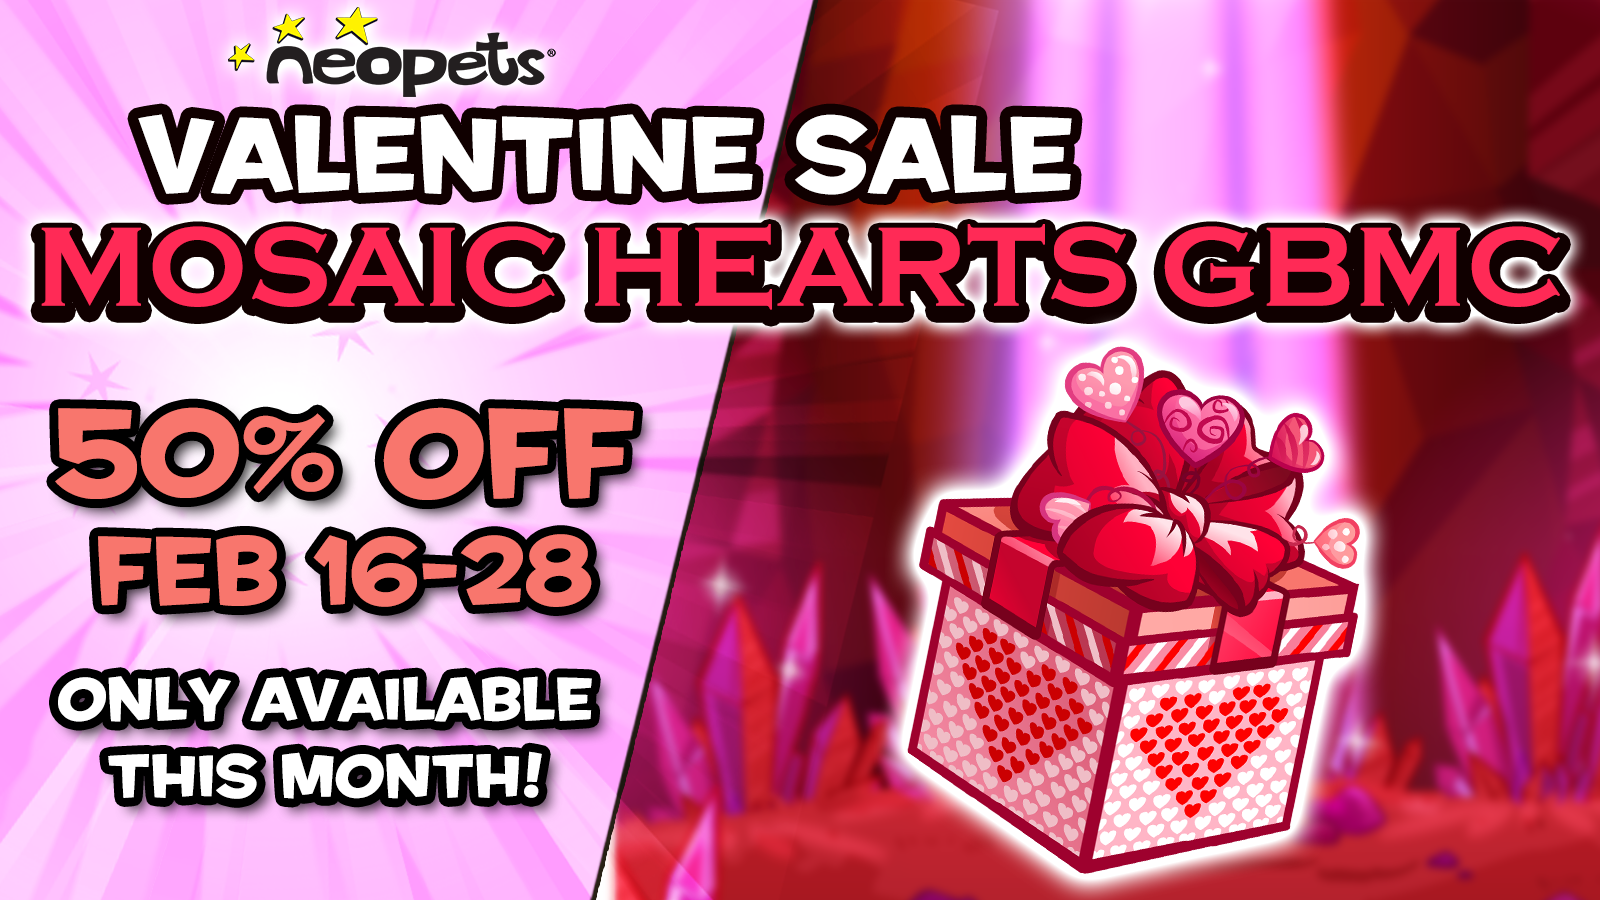 https://images.neopets.com/homepage/marquee/mosaic_hearts_gbmc_bill.png